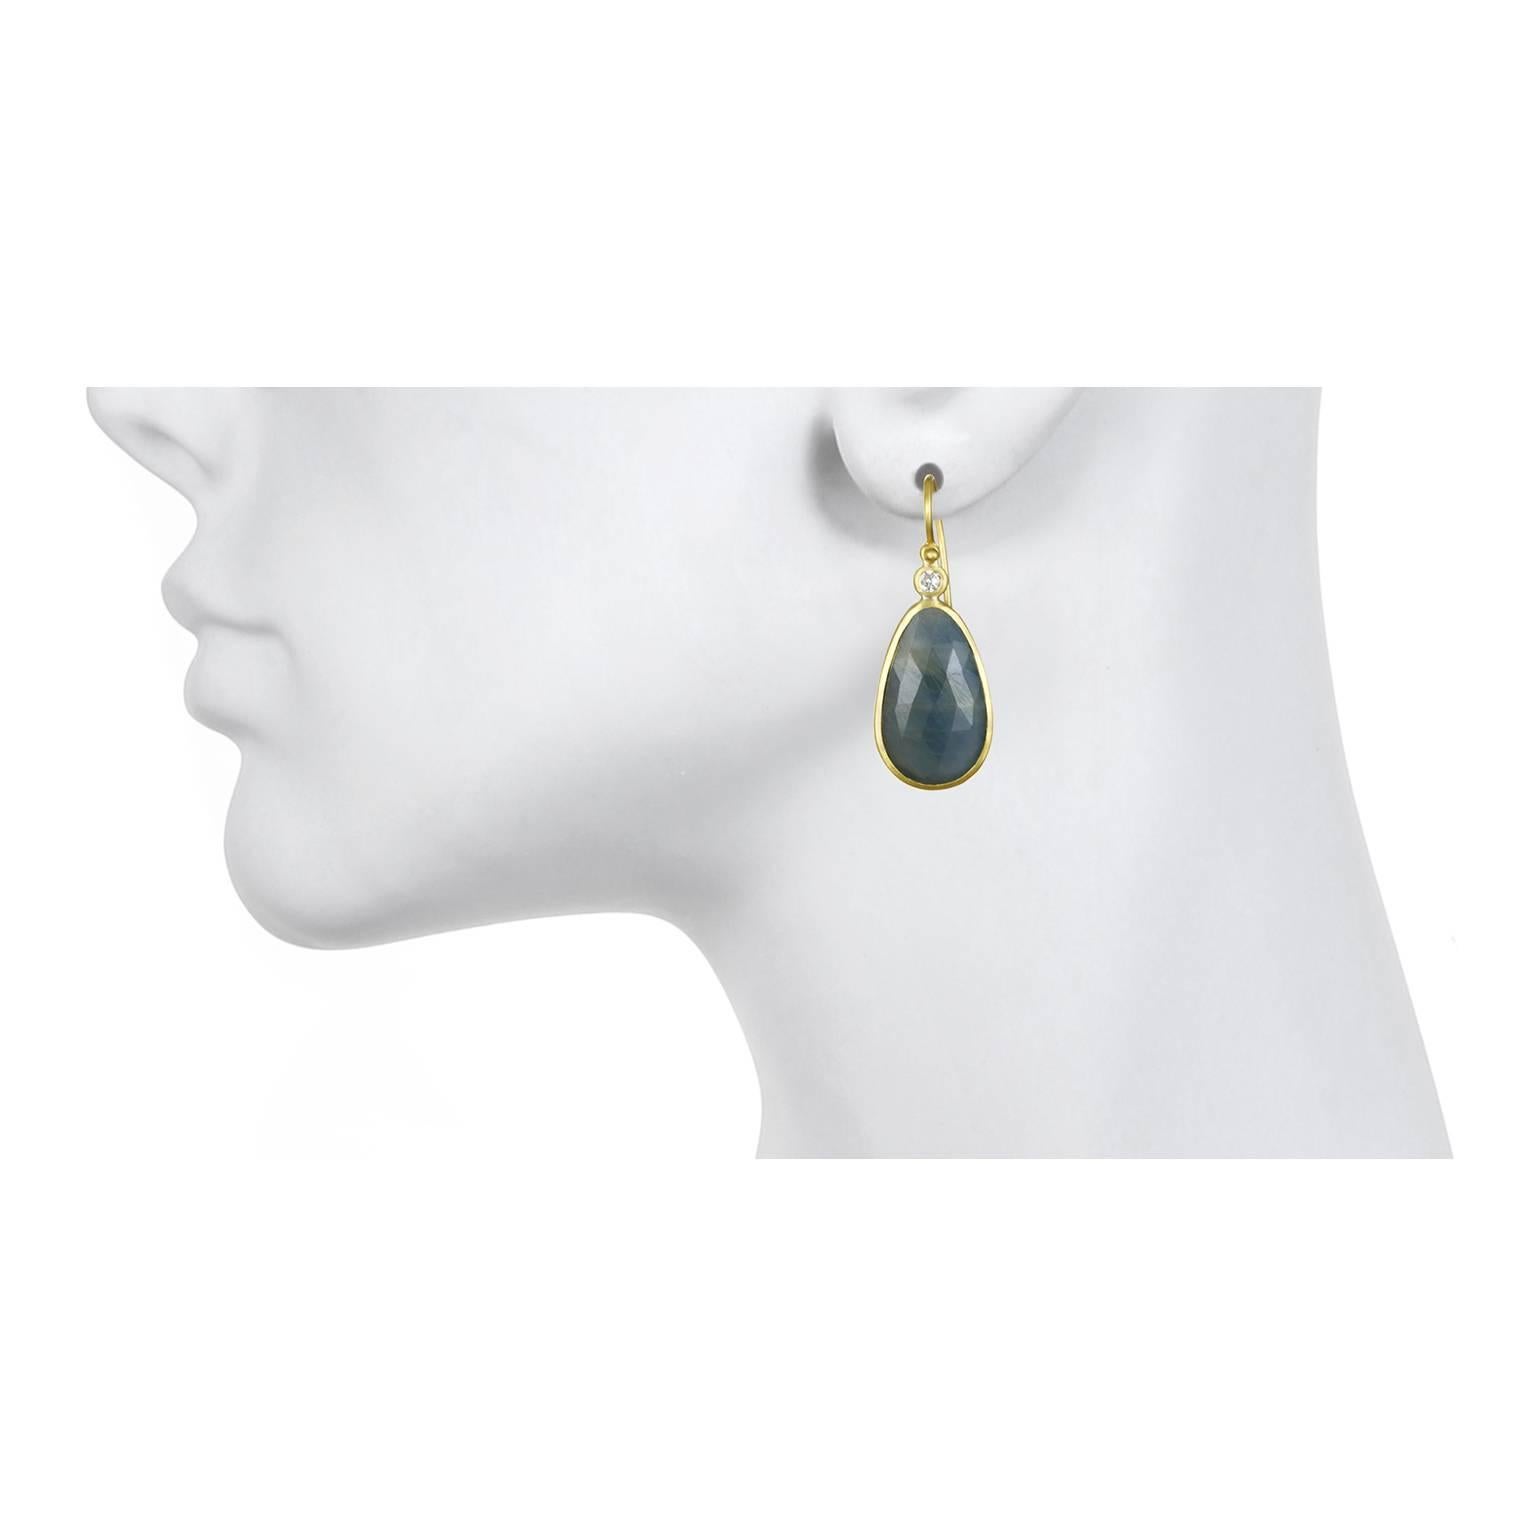 For those of us who appreciate and covet items that are truly unique, these earrings are it!  Handcrafted in 18k green* gold, rose cut blue sapphire slices are bezel set and paired with bezel set diamonds. The diamonds contrast and add a sparkle to